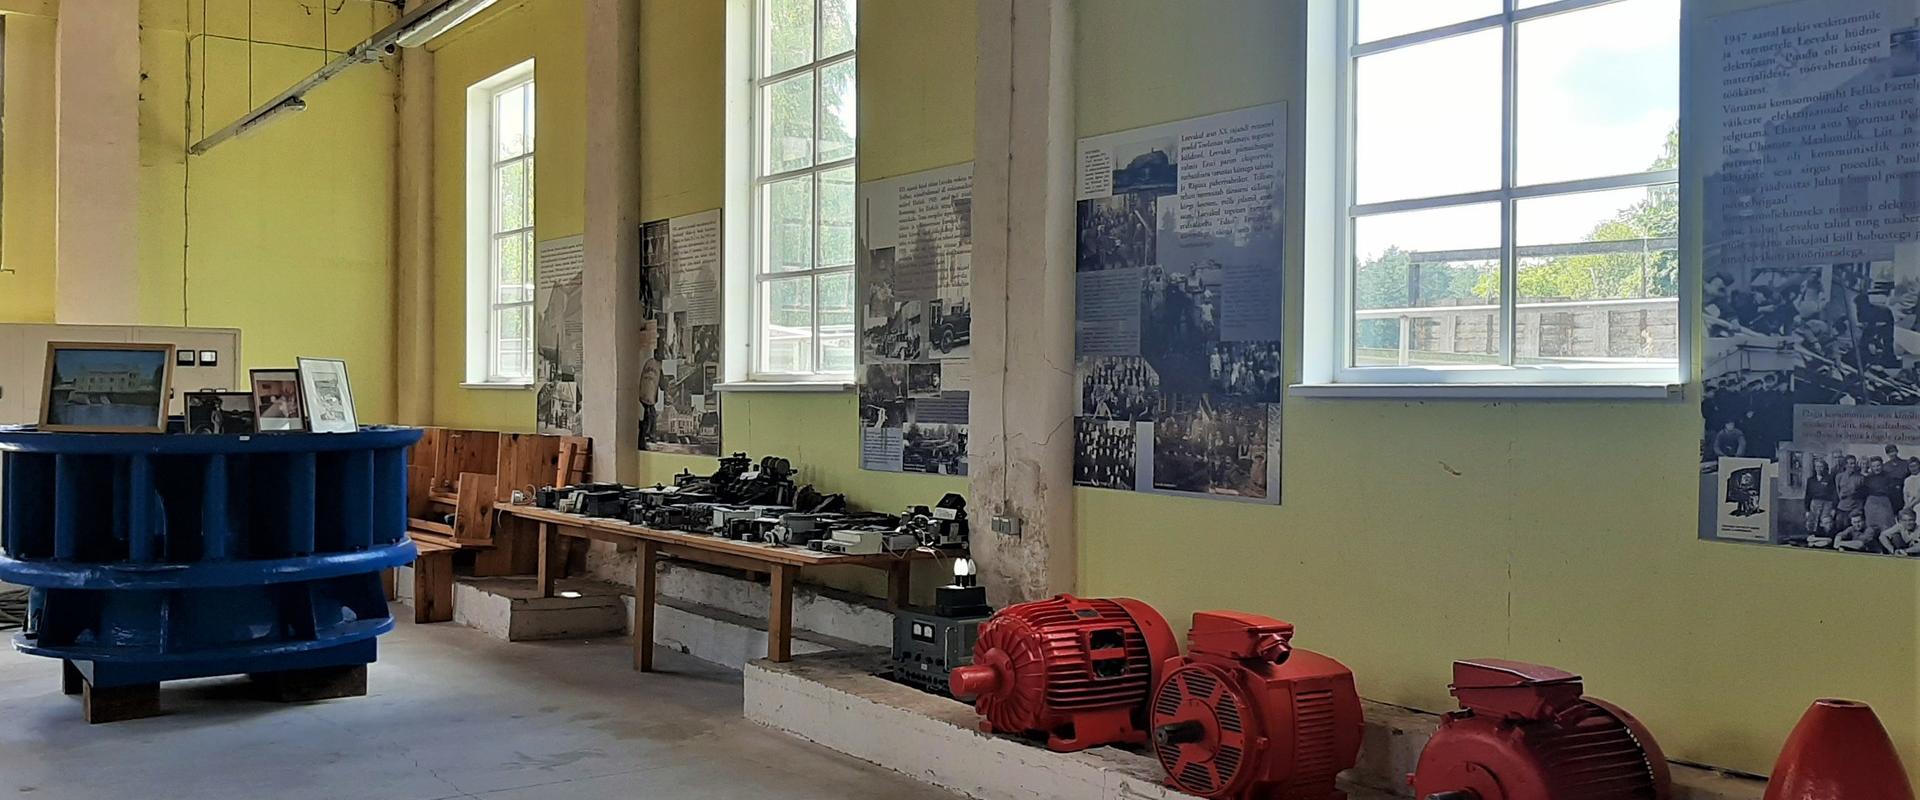 Leevaku Hydroelectric Power Station and Museum